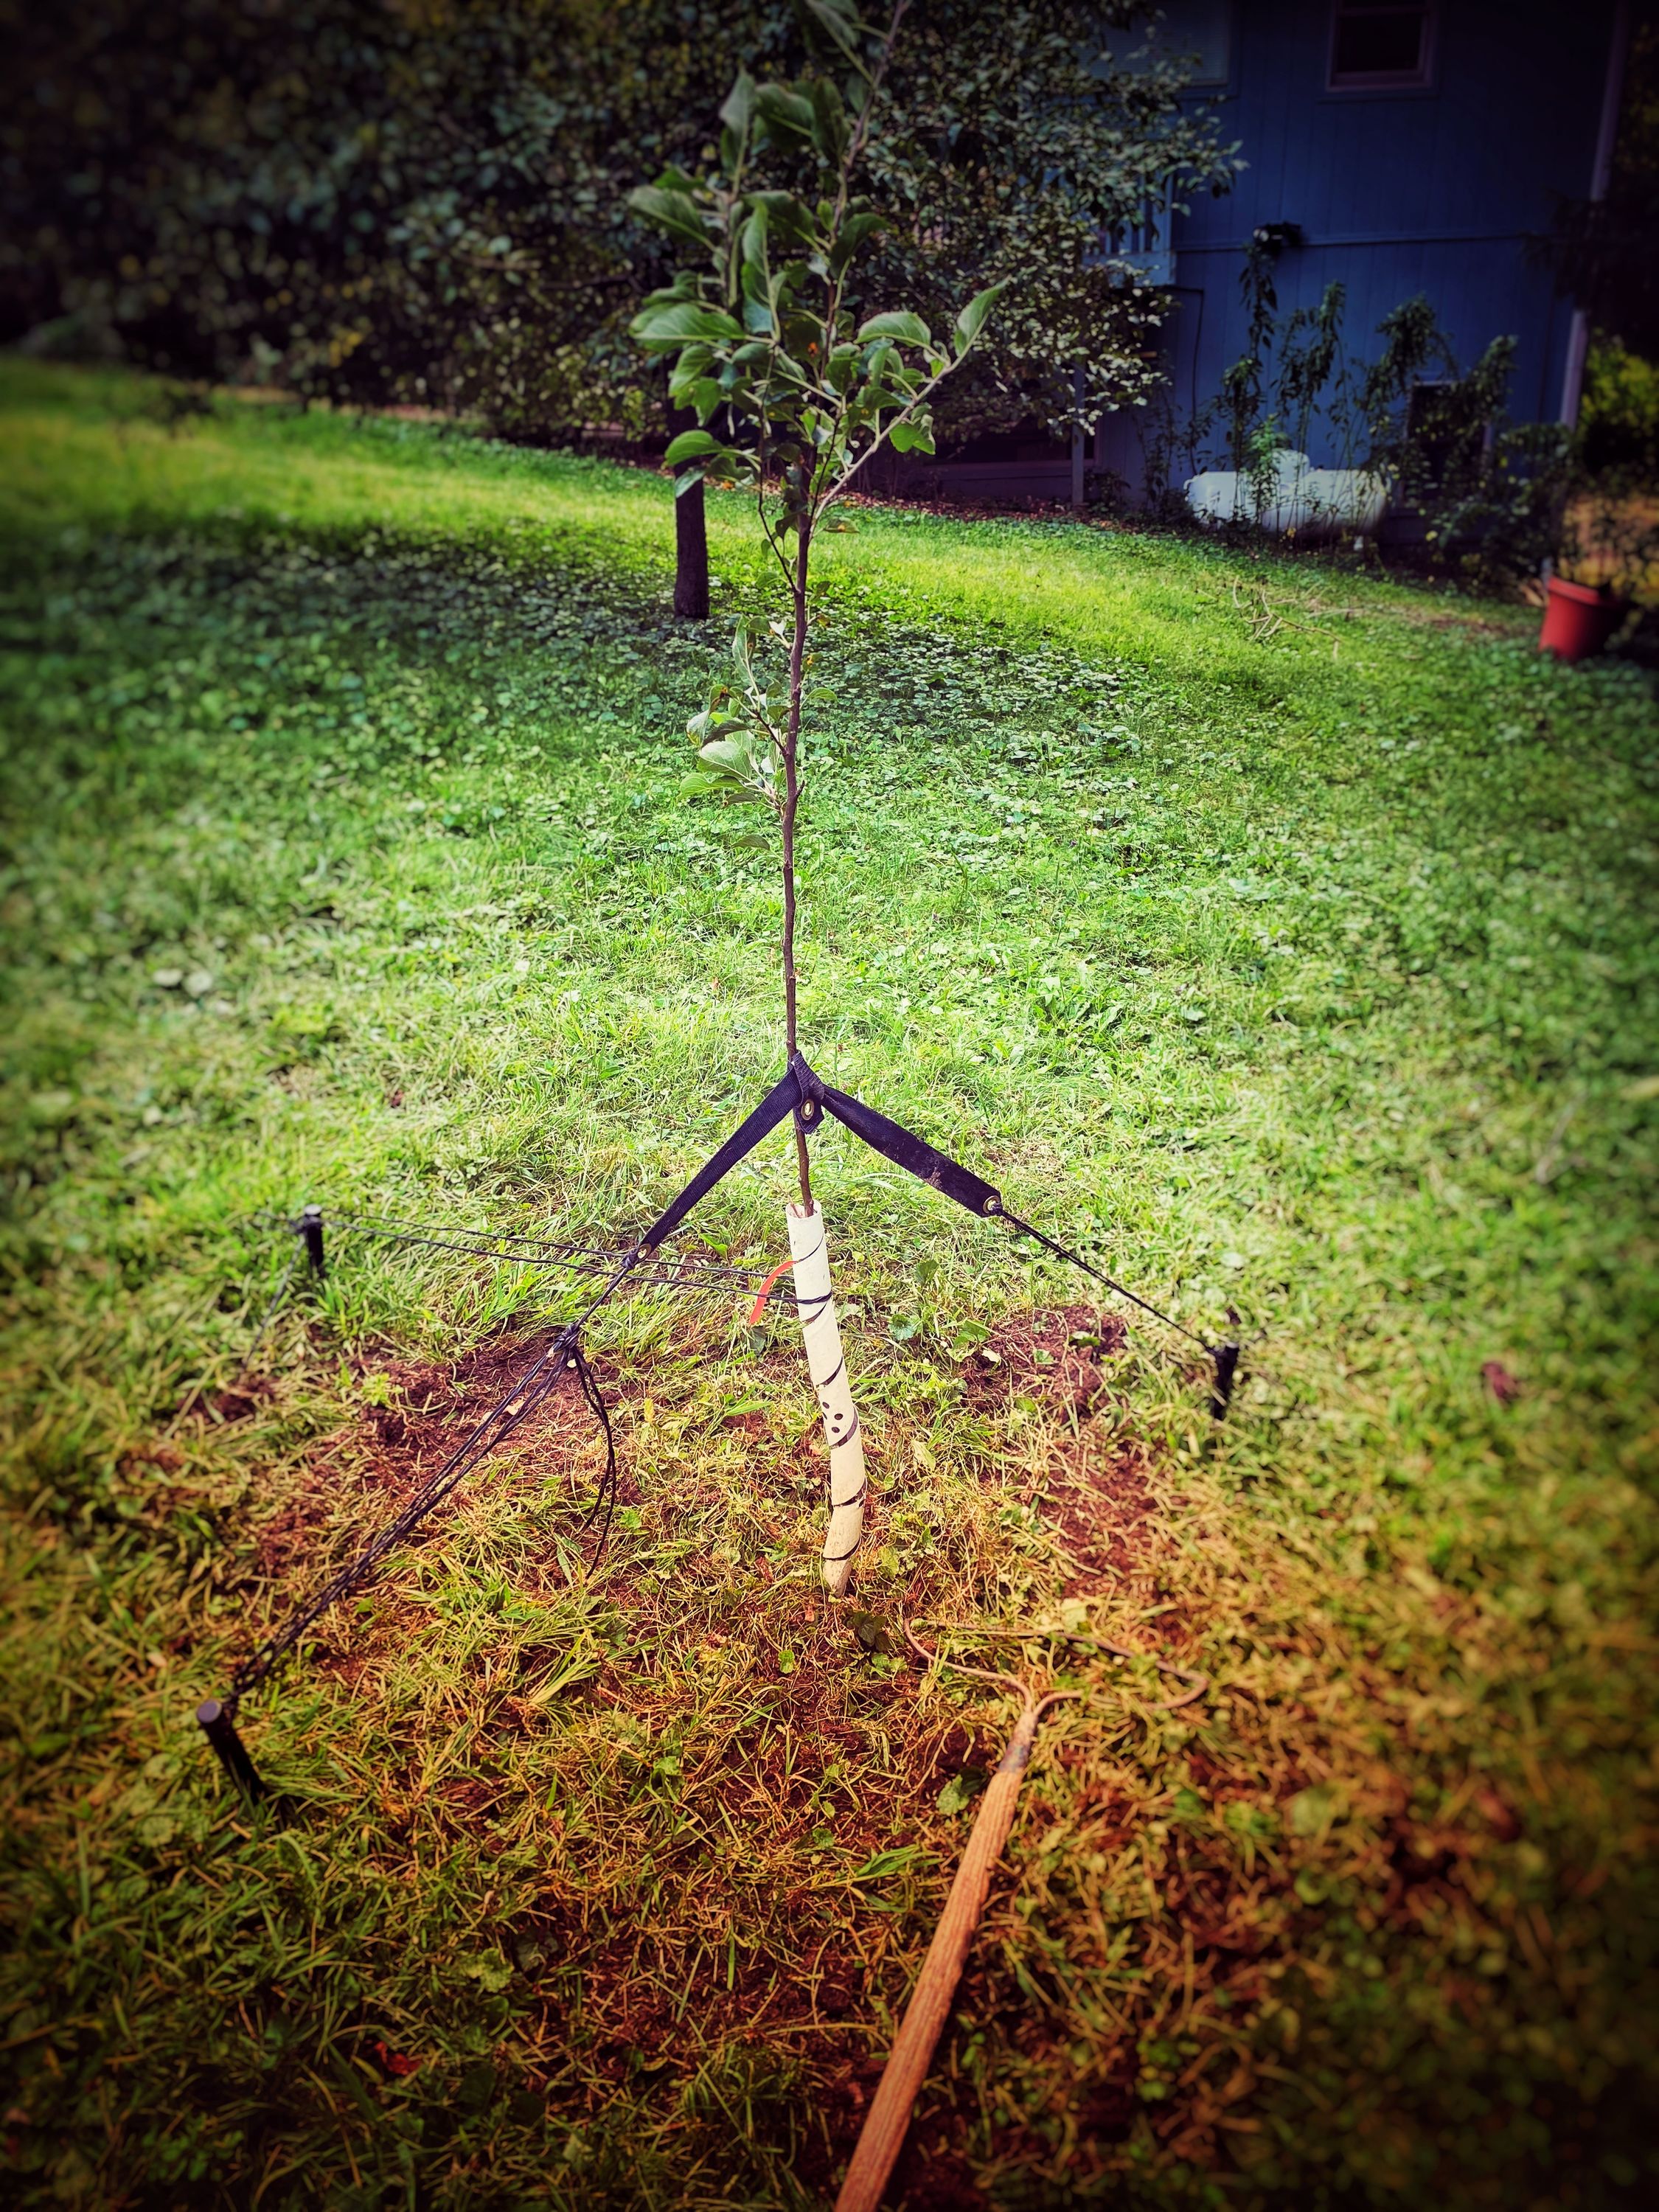 An apple tree sampling with the ground around it scraped and hoed.